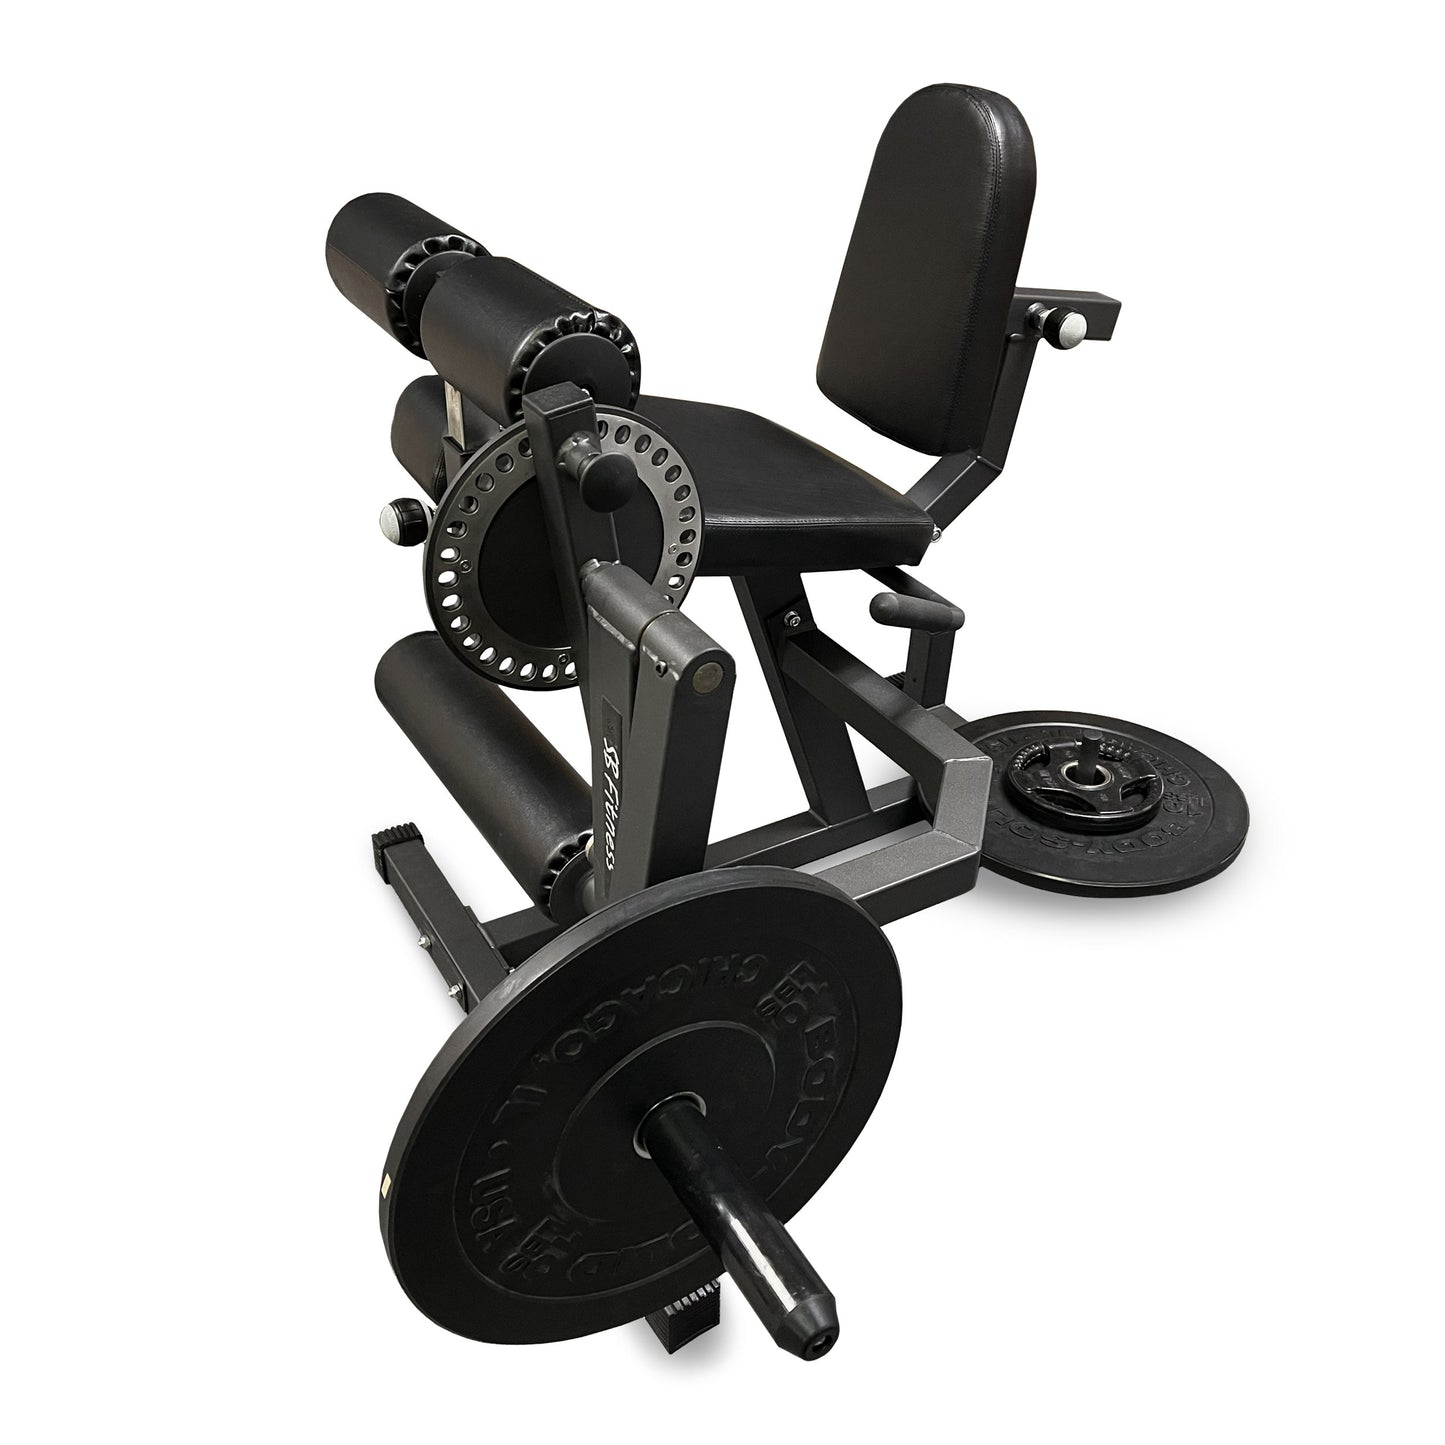 SB Fitness Commercial Seated Leg Extension/Leg Curl Combo